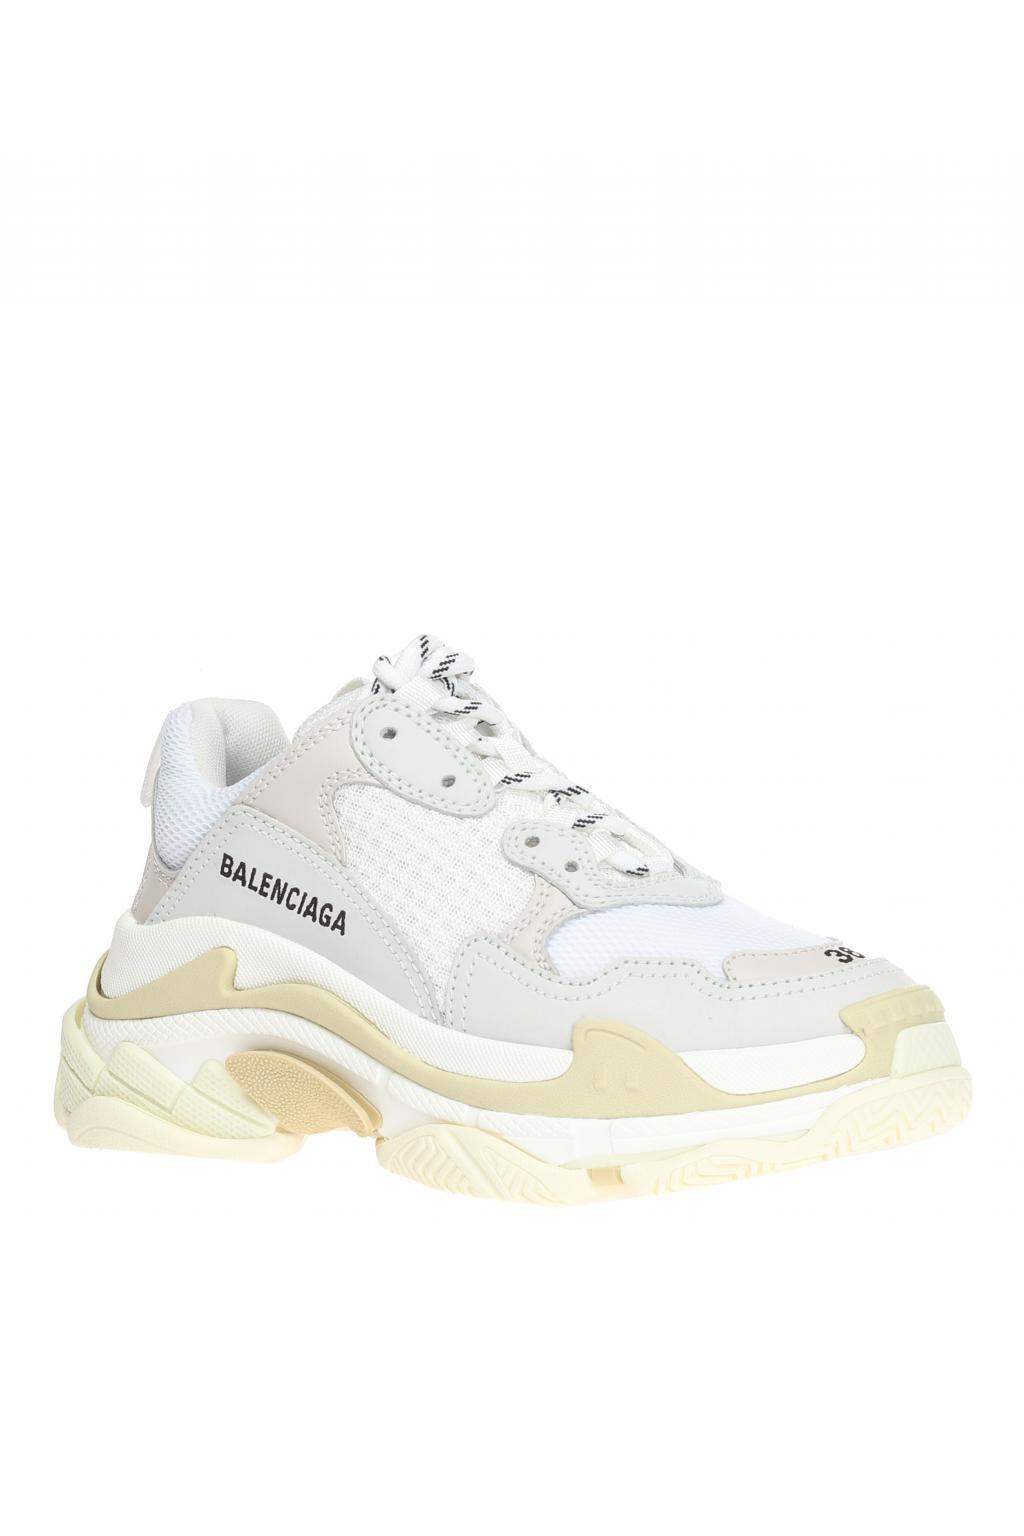 Balenciaga Leather 'triple S' Sneakers in White - Lyst